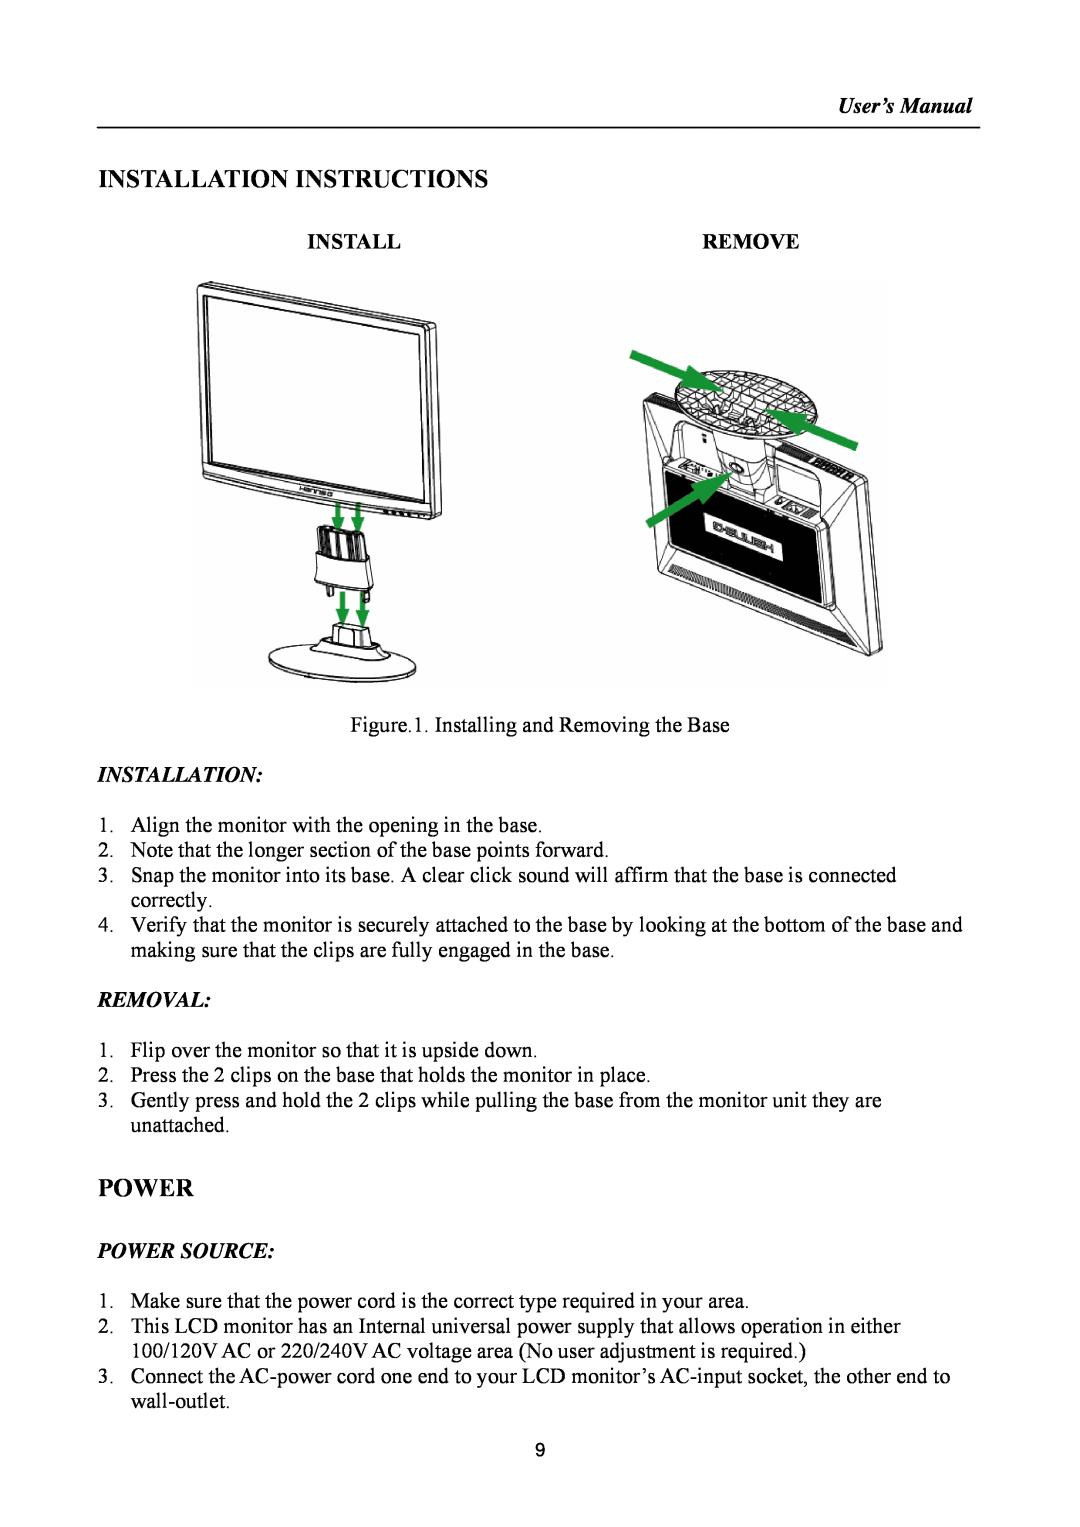 Hanns.G HA191 manual Installation Instructions, User’s Manual, Remove, Removal, Power Source 